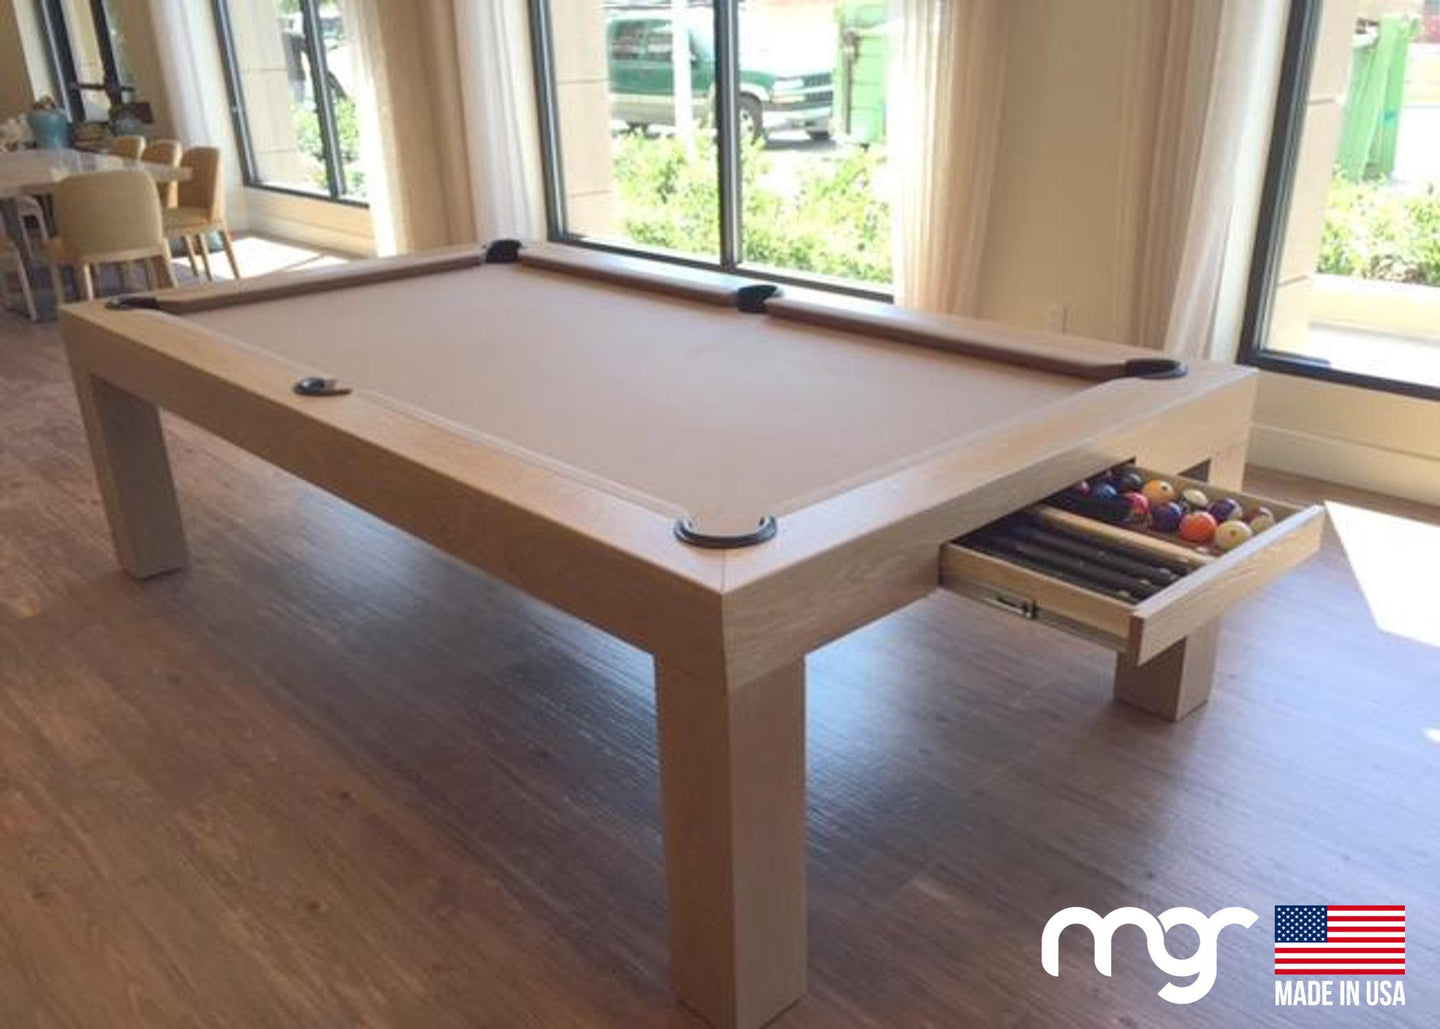 The Modern X44 Pool Table